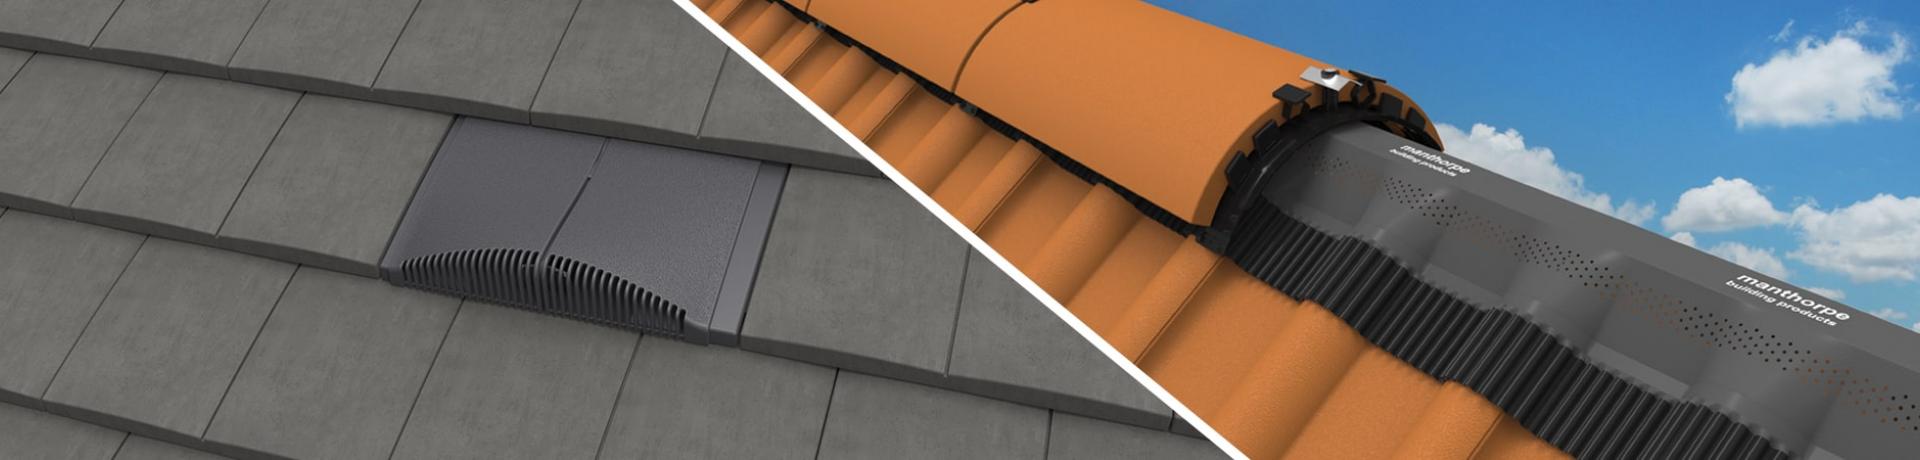 Dual image showing a grey interlocking plain tile vent on the left and a terracotta roll-out dry ridge system on the right